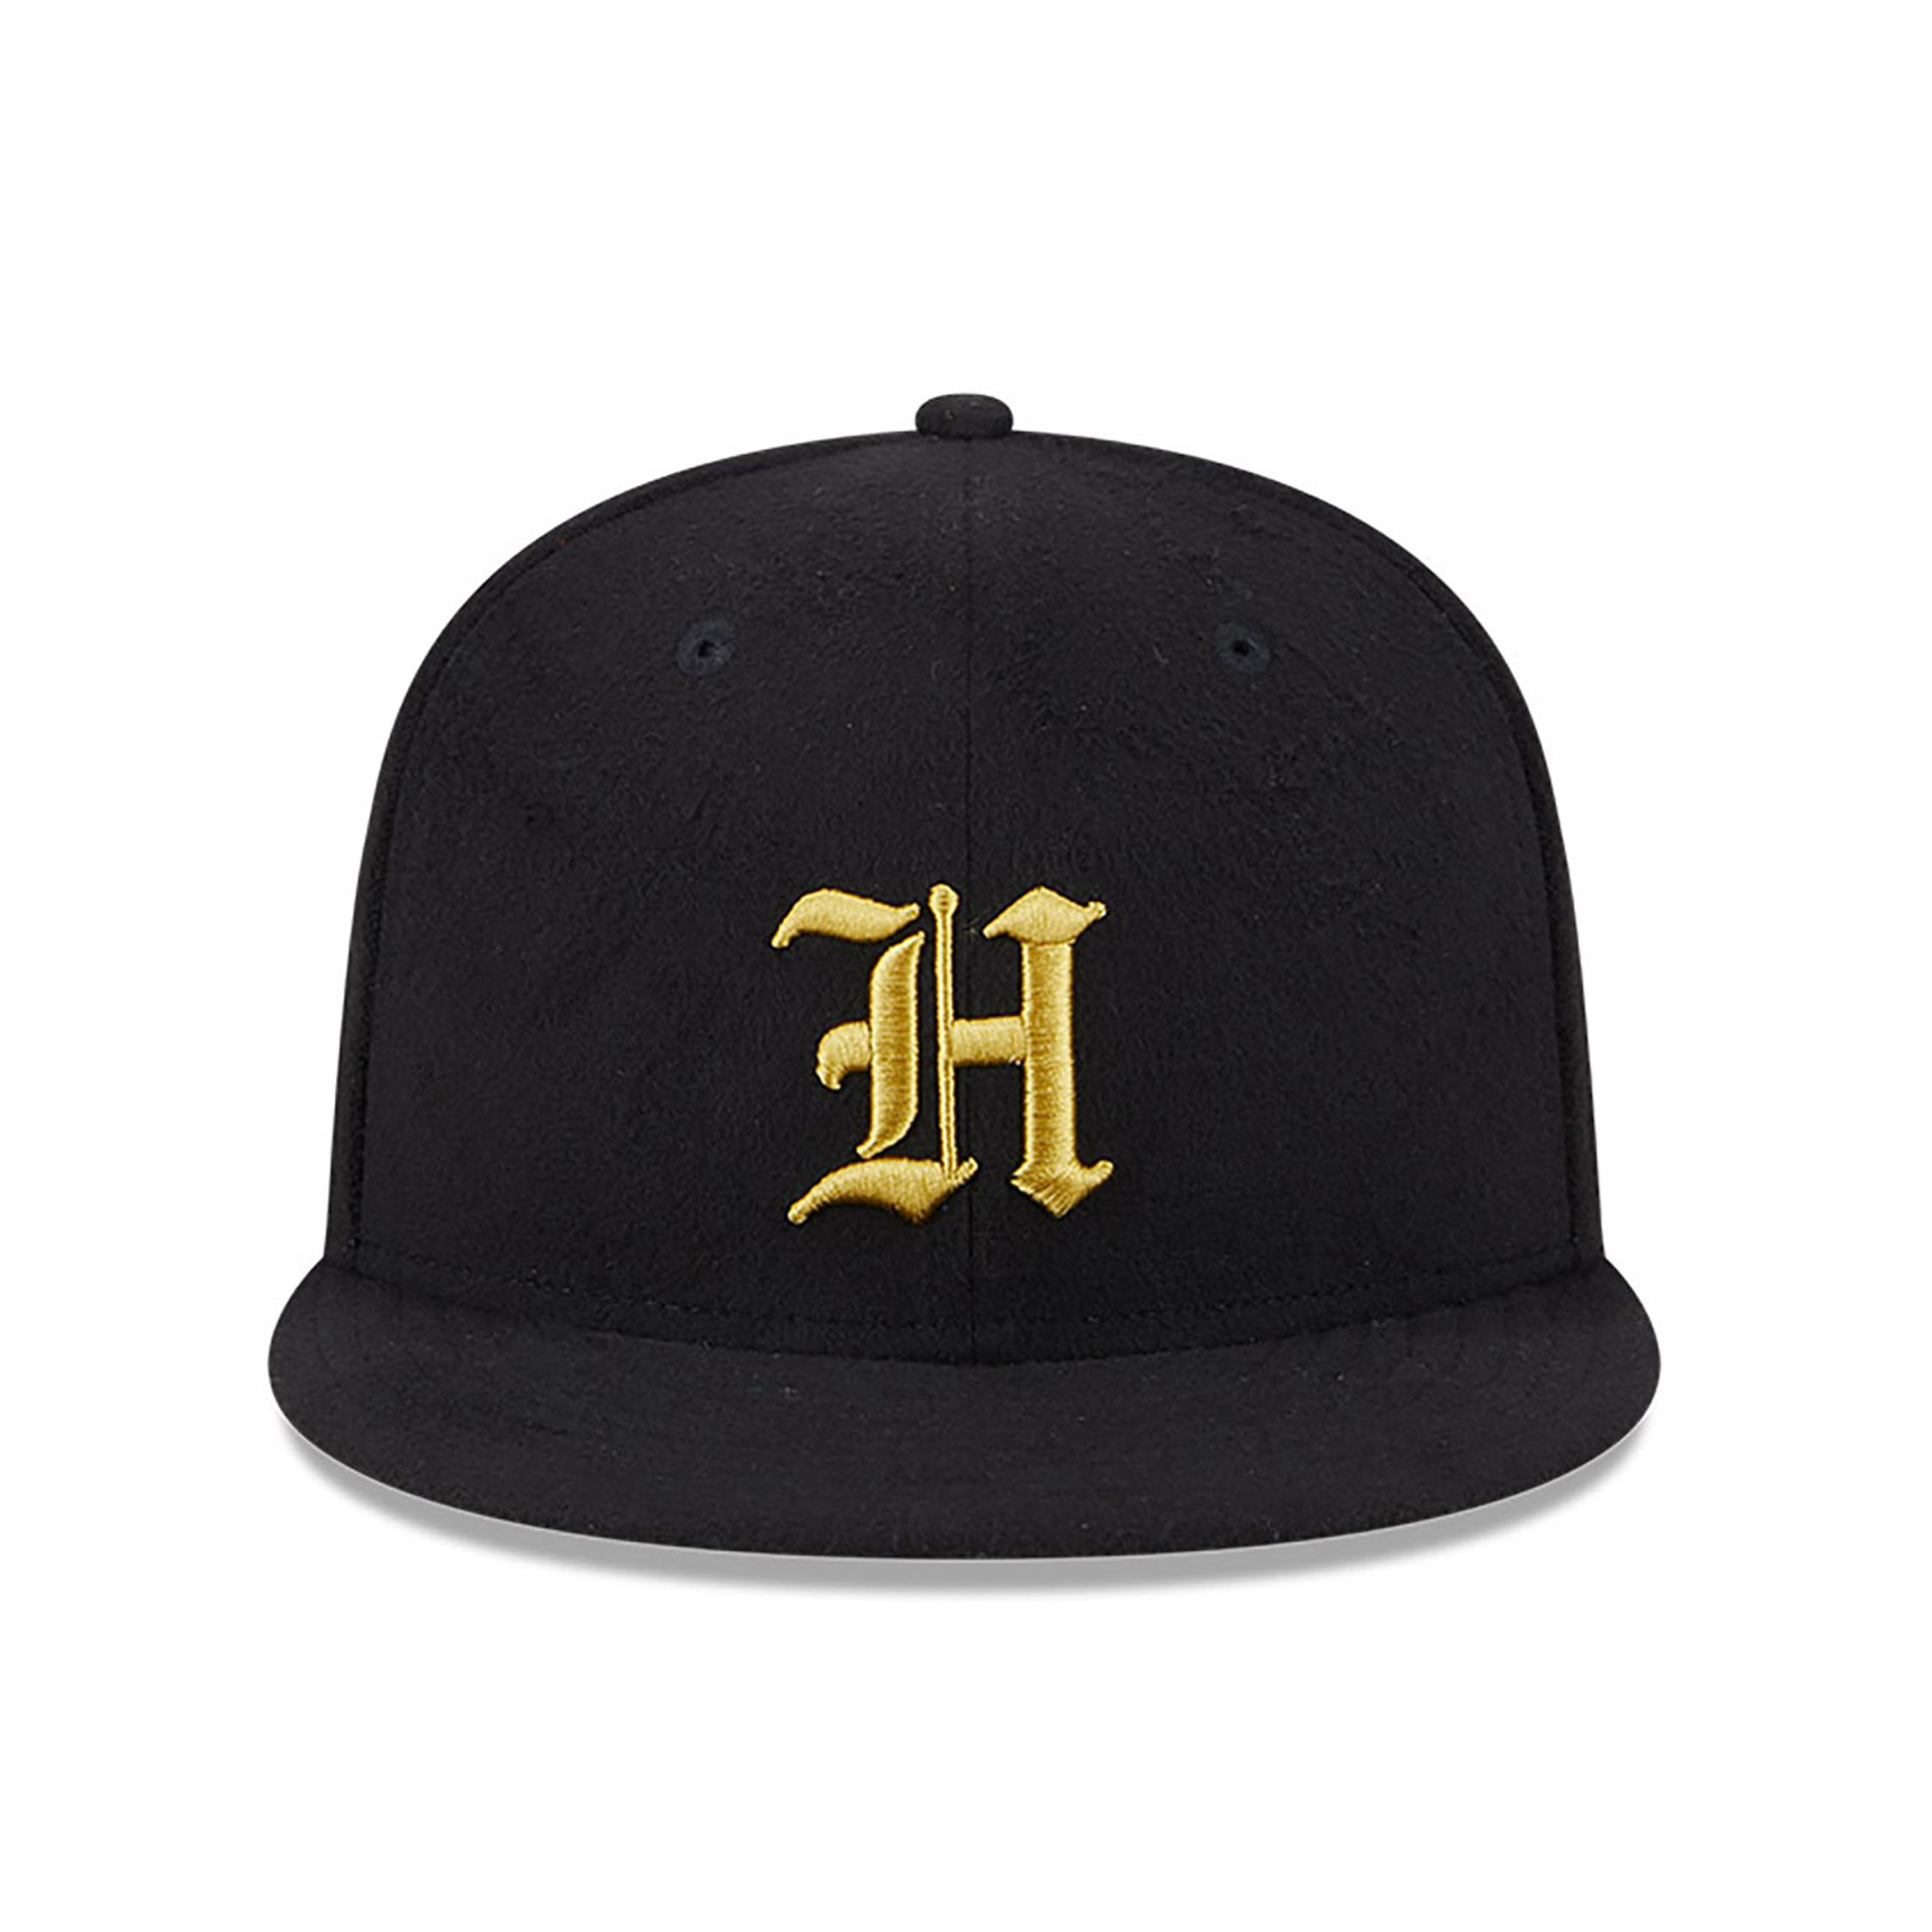 Harry Potter and the Deathly Hallows Part 2 Hufflepuff Black 9FIFTY Snapback Cap